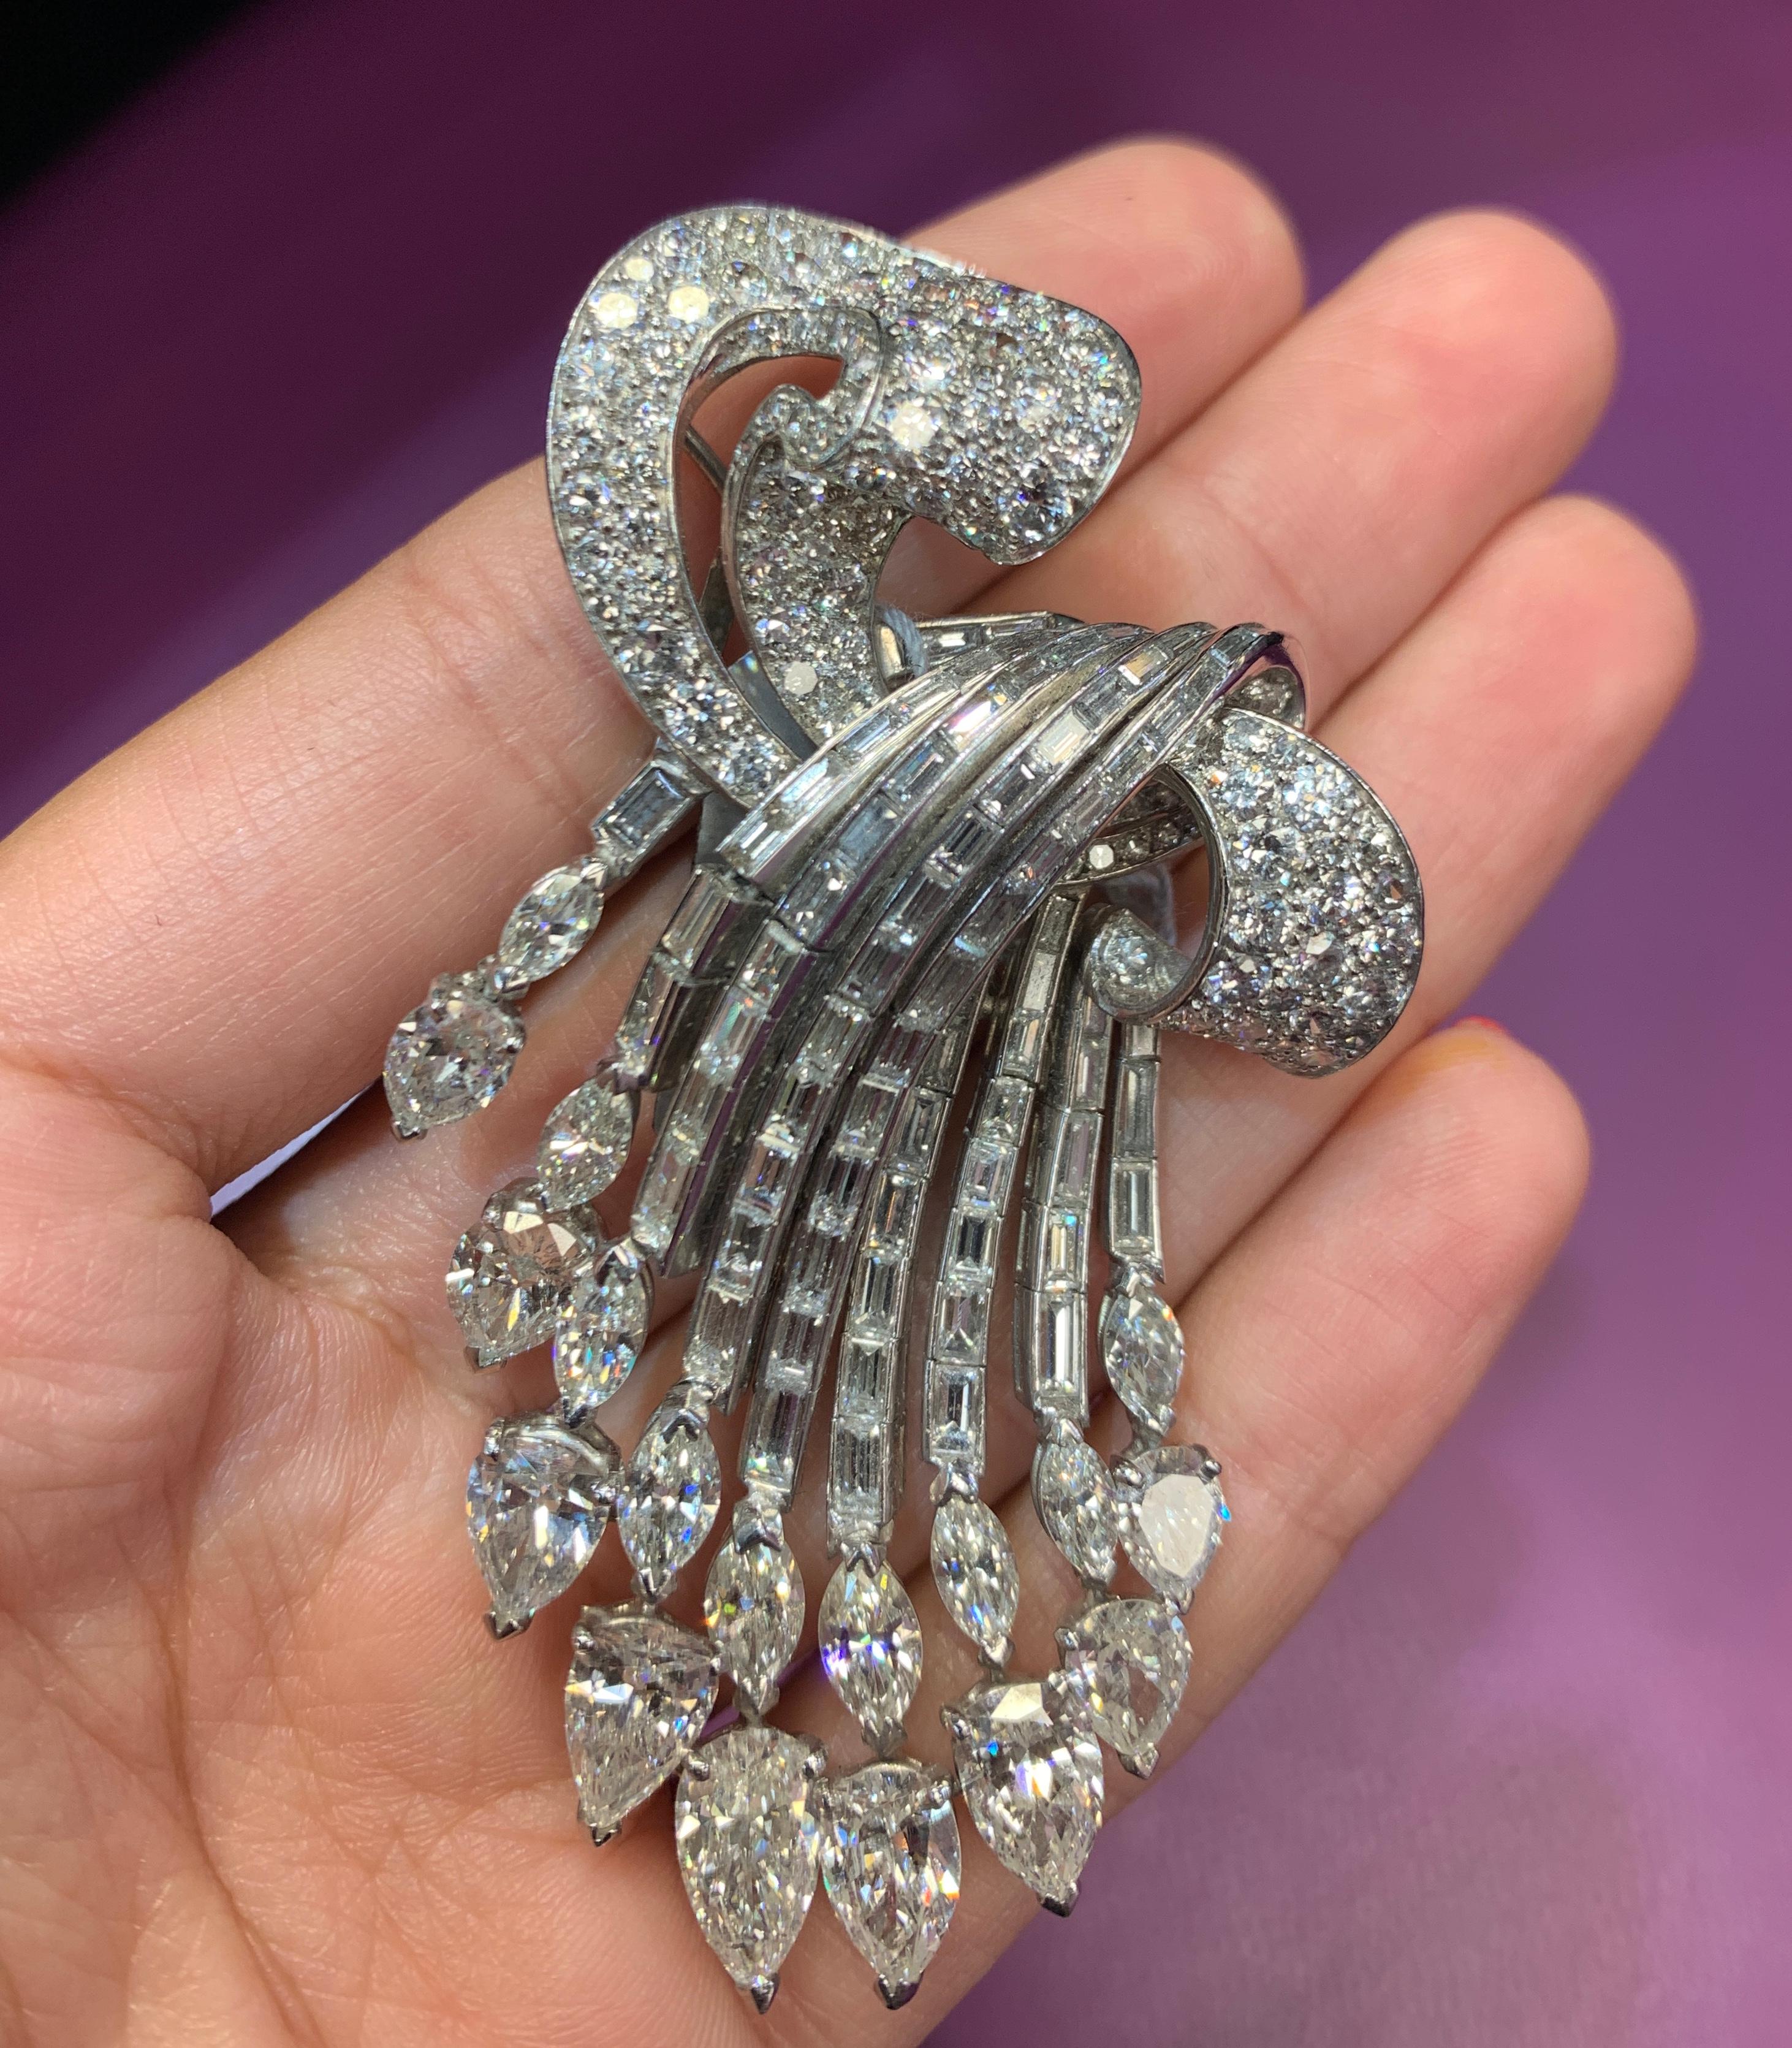 Diamond Cascade Brooch, Set in 18K White Gold consisting of  Nine pear shape diamonds totaling 8.35 carats, marquise cut diamonds 2.68 carats, 77 baguettes totaling 4.40 carats & 105 round cut diamonds totaling 3.90 carats.
Approx Measurements: 2.5